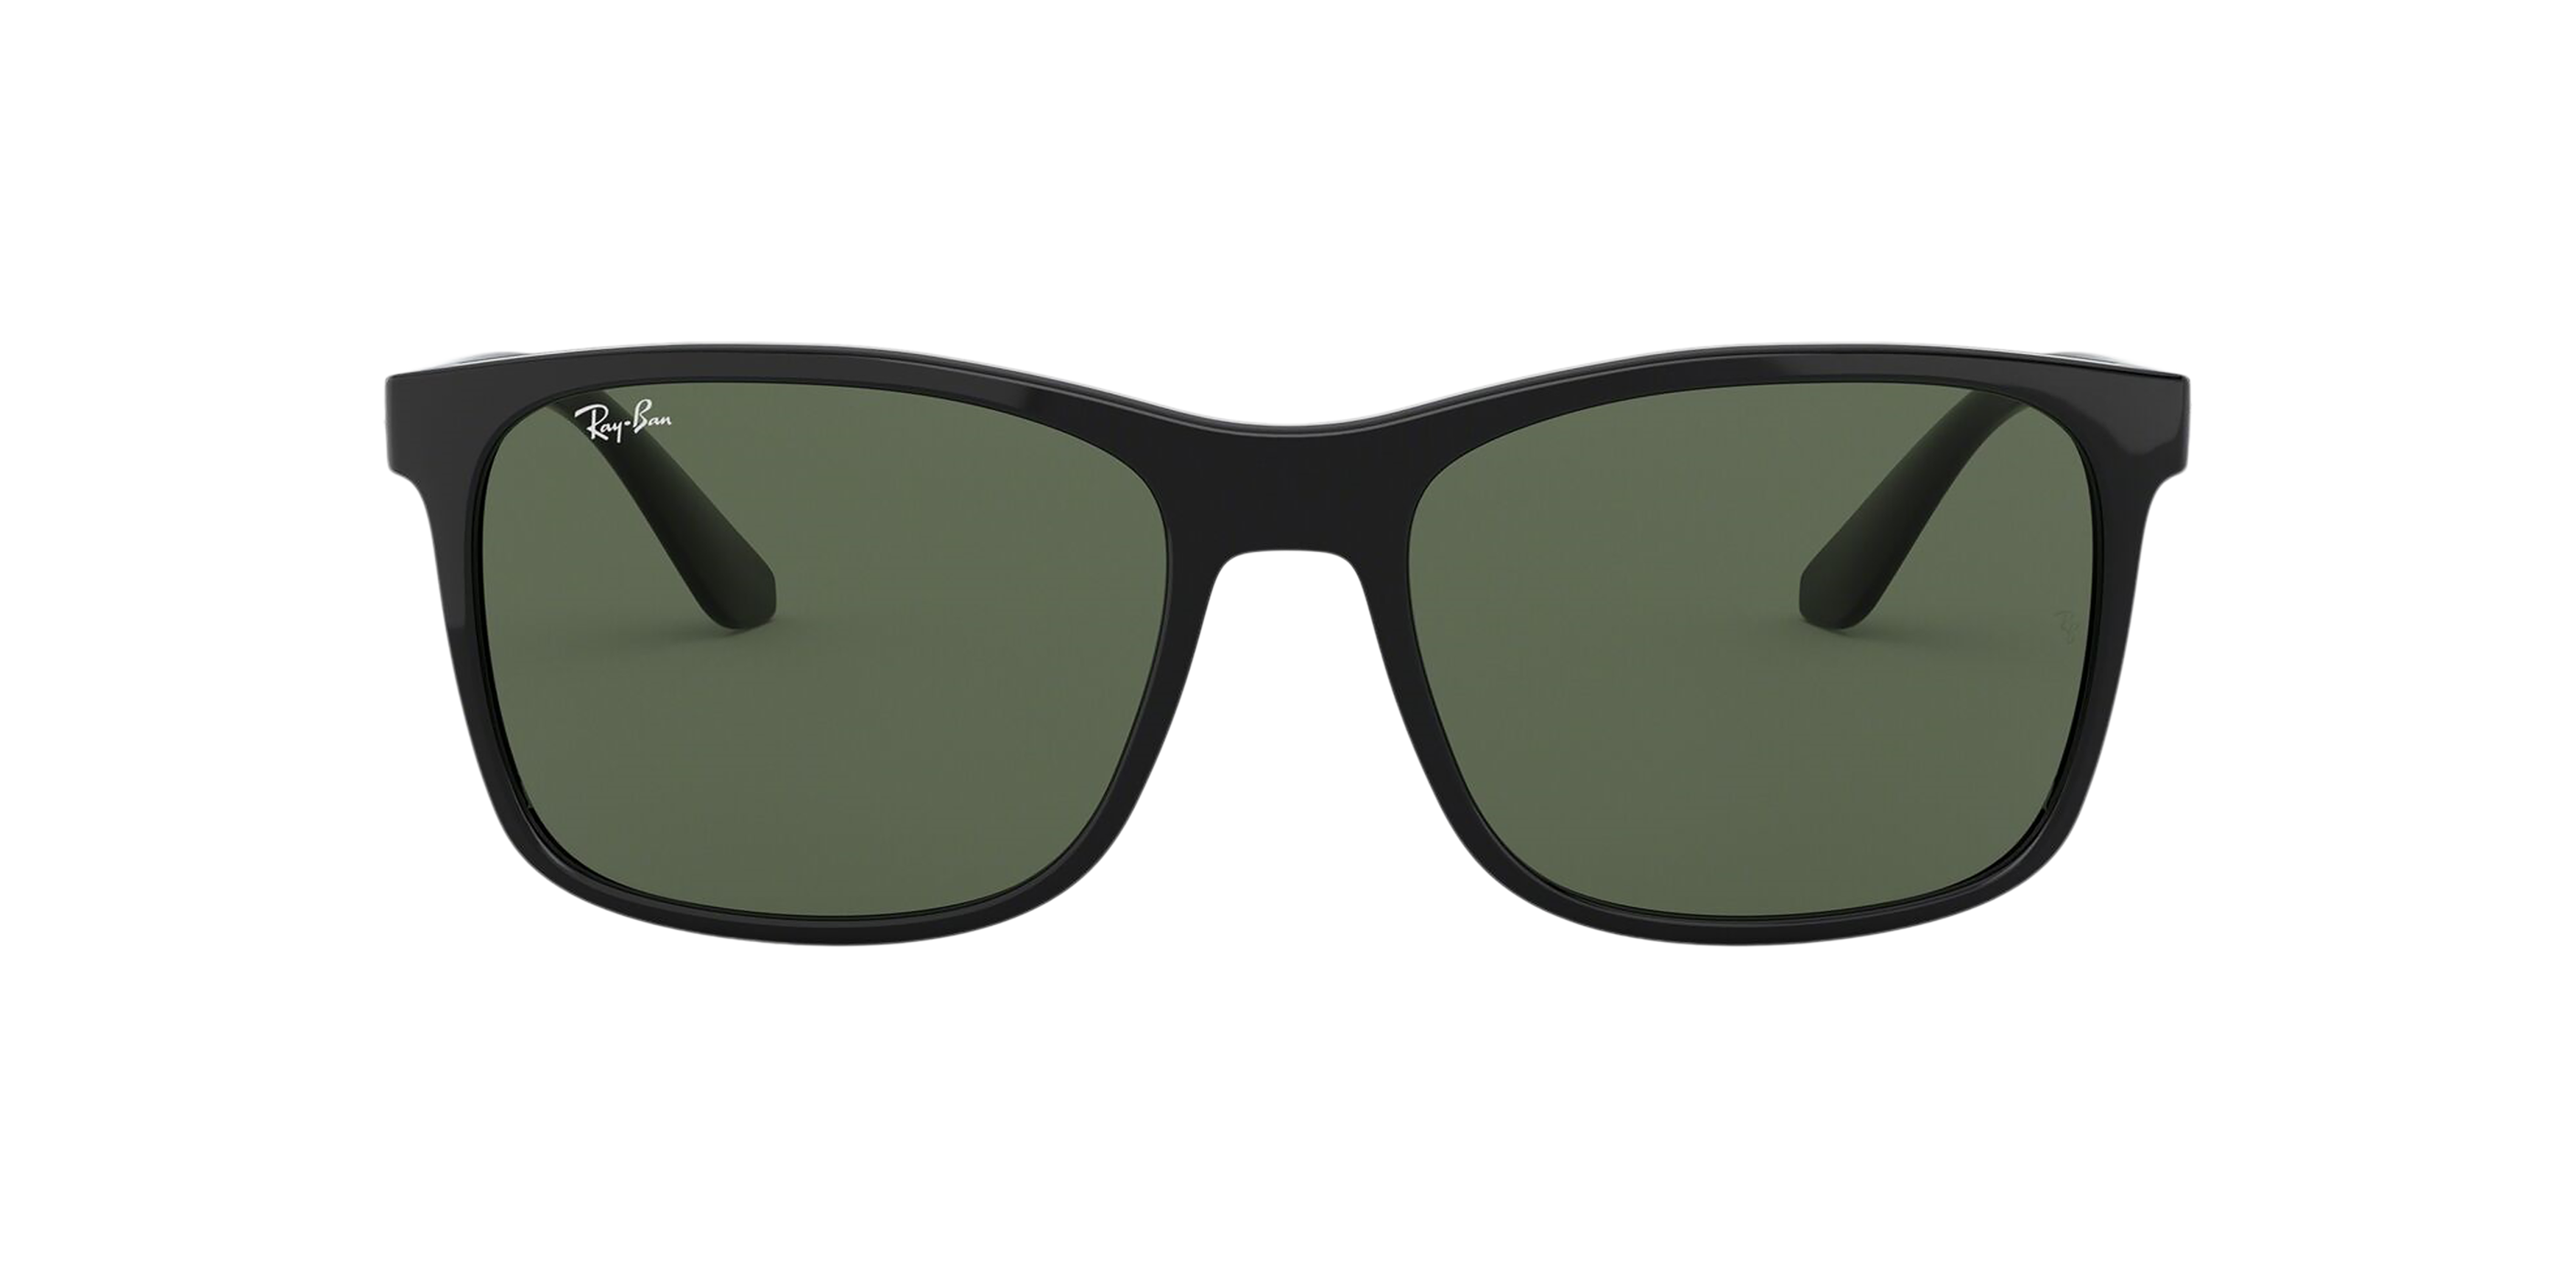 [products.image.front] Ray-Ban RB4232 601/71